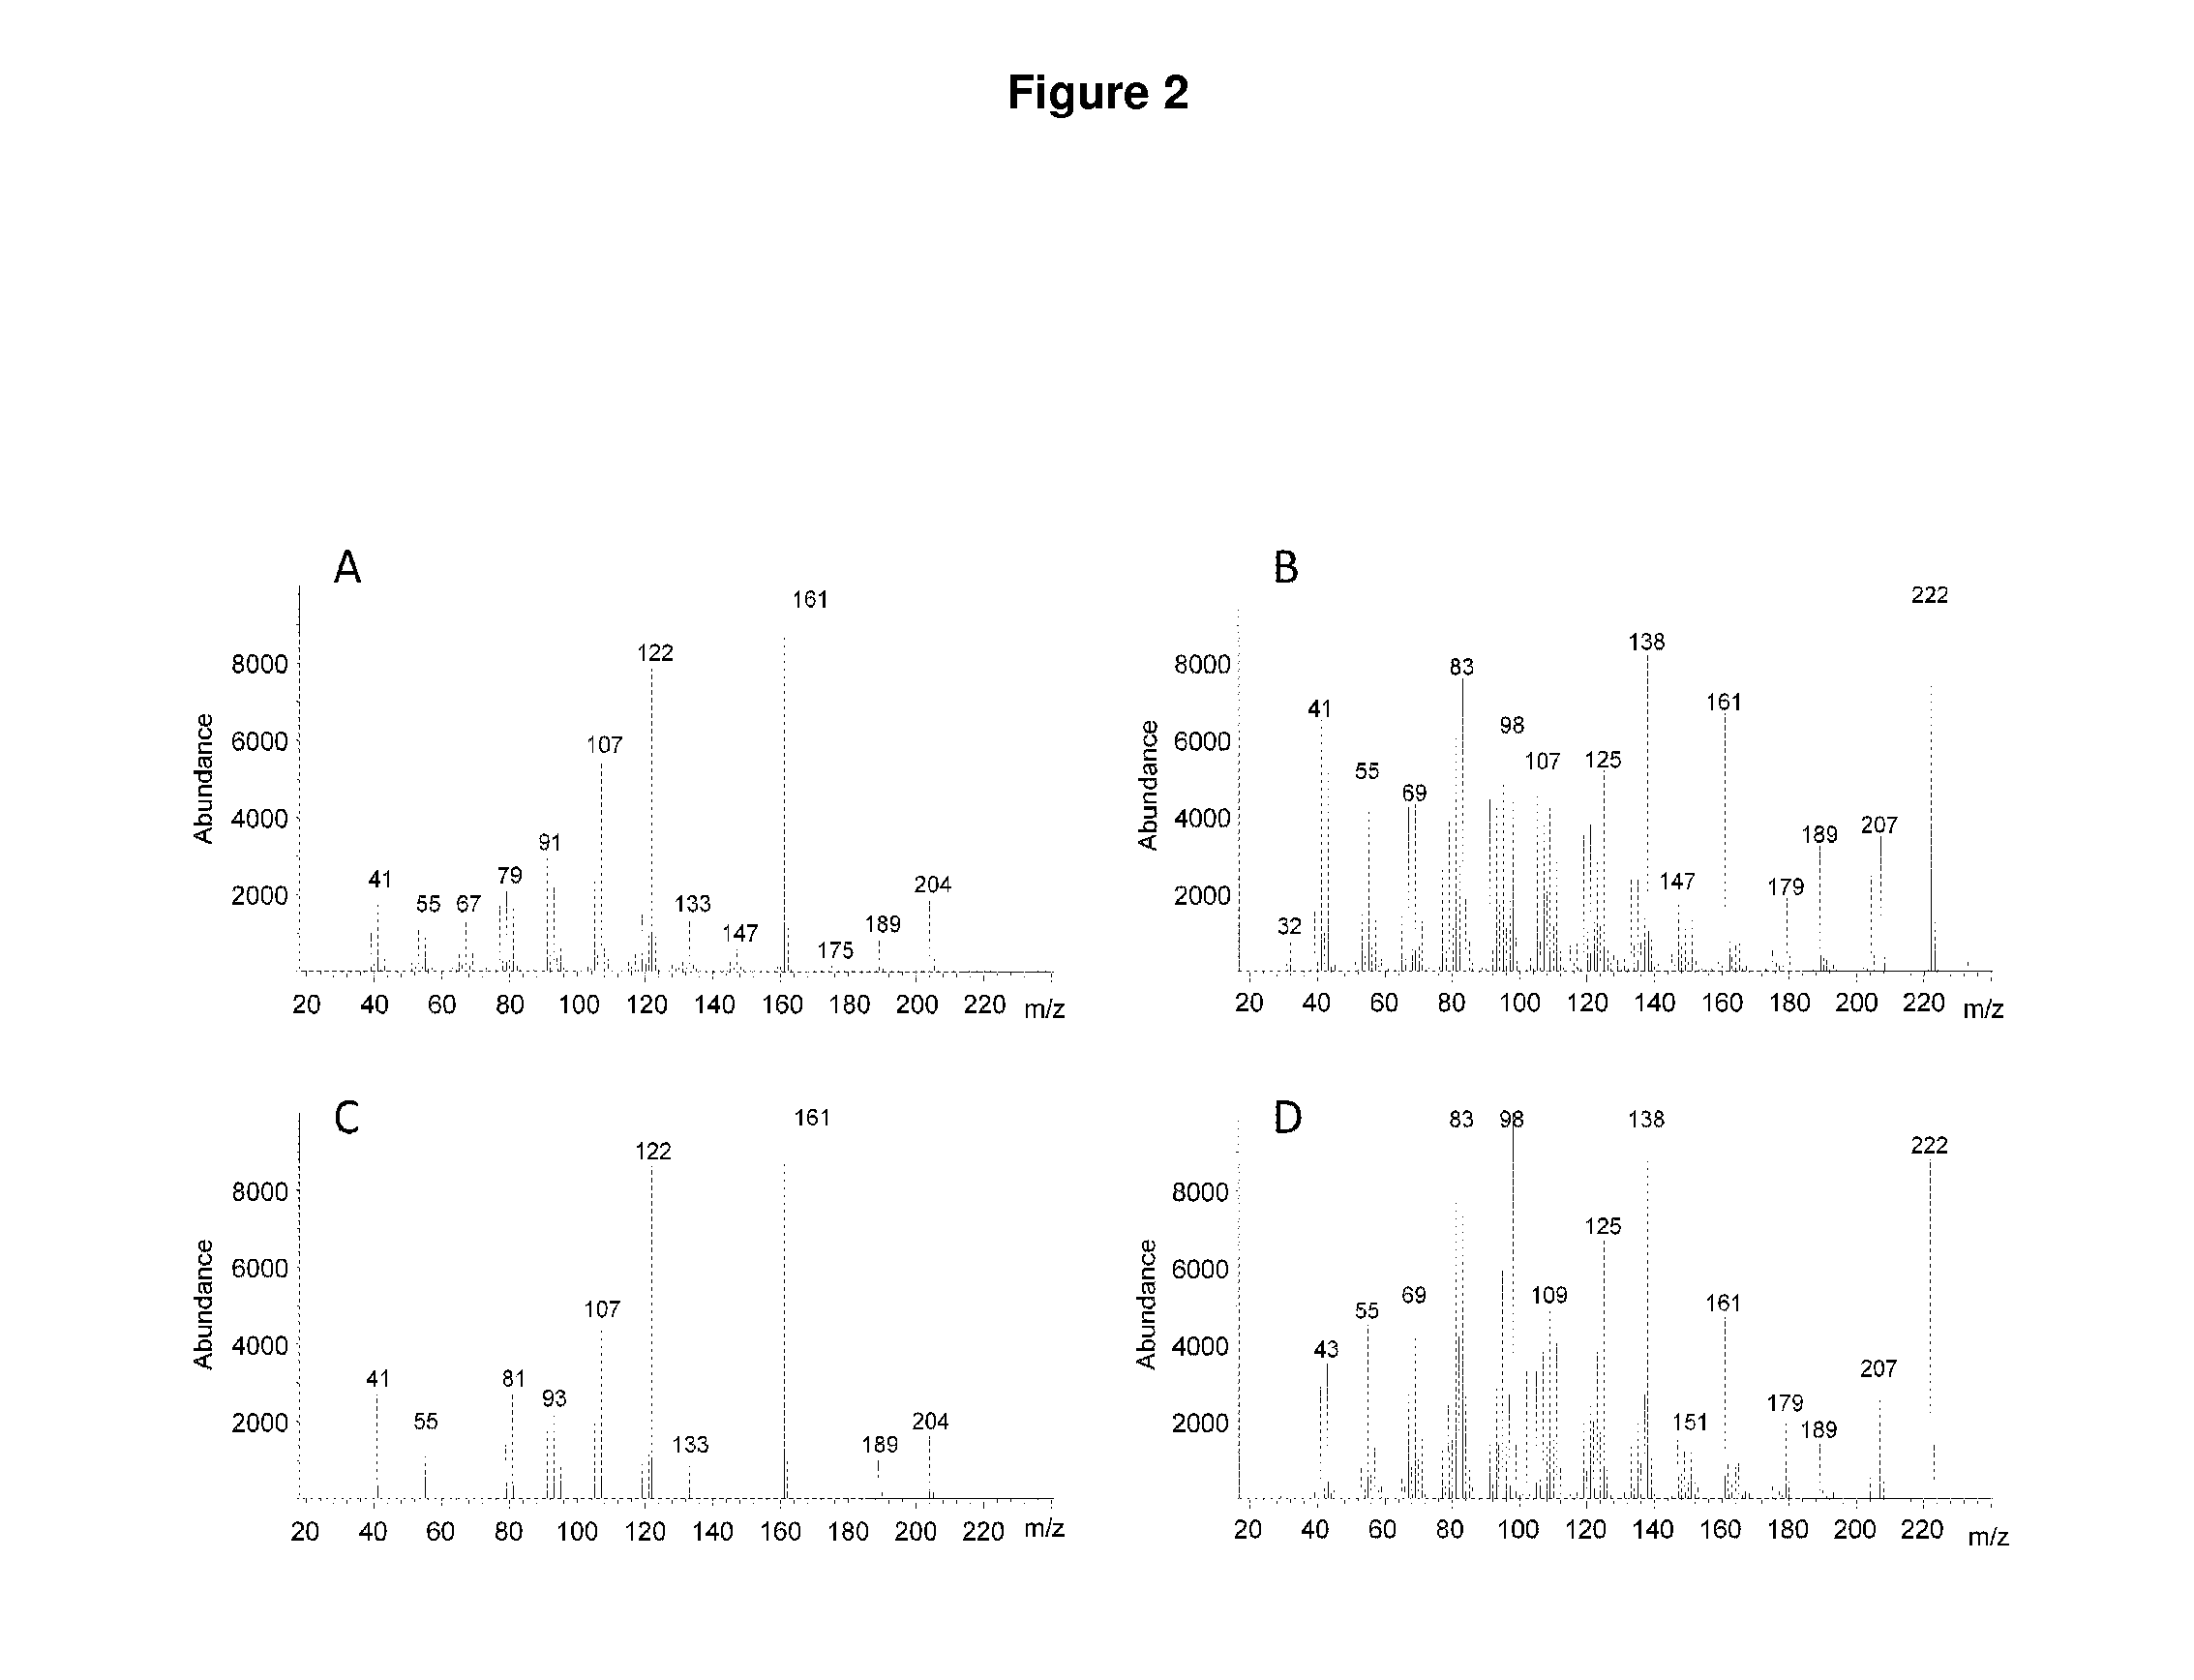 Method for producing patchoulol and 7-epi-alpha-selinene